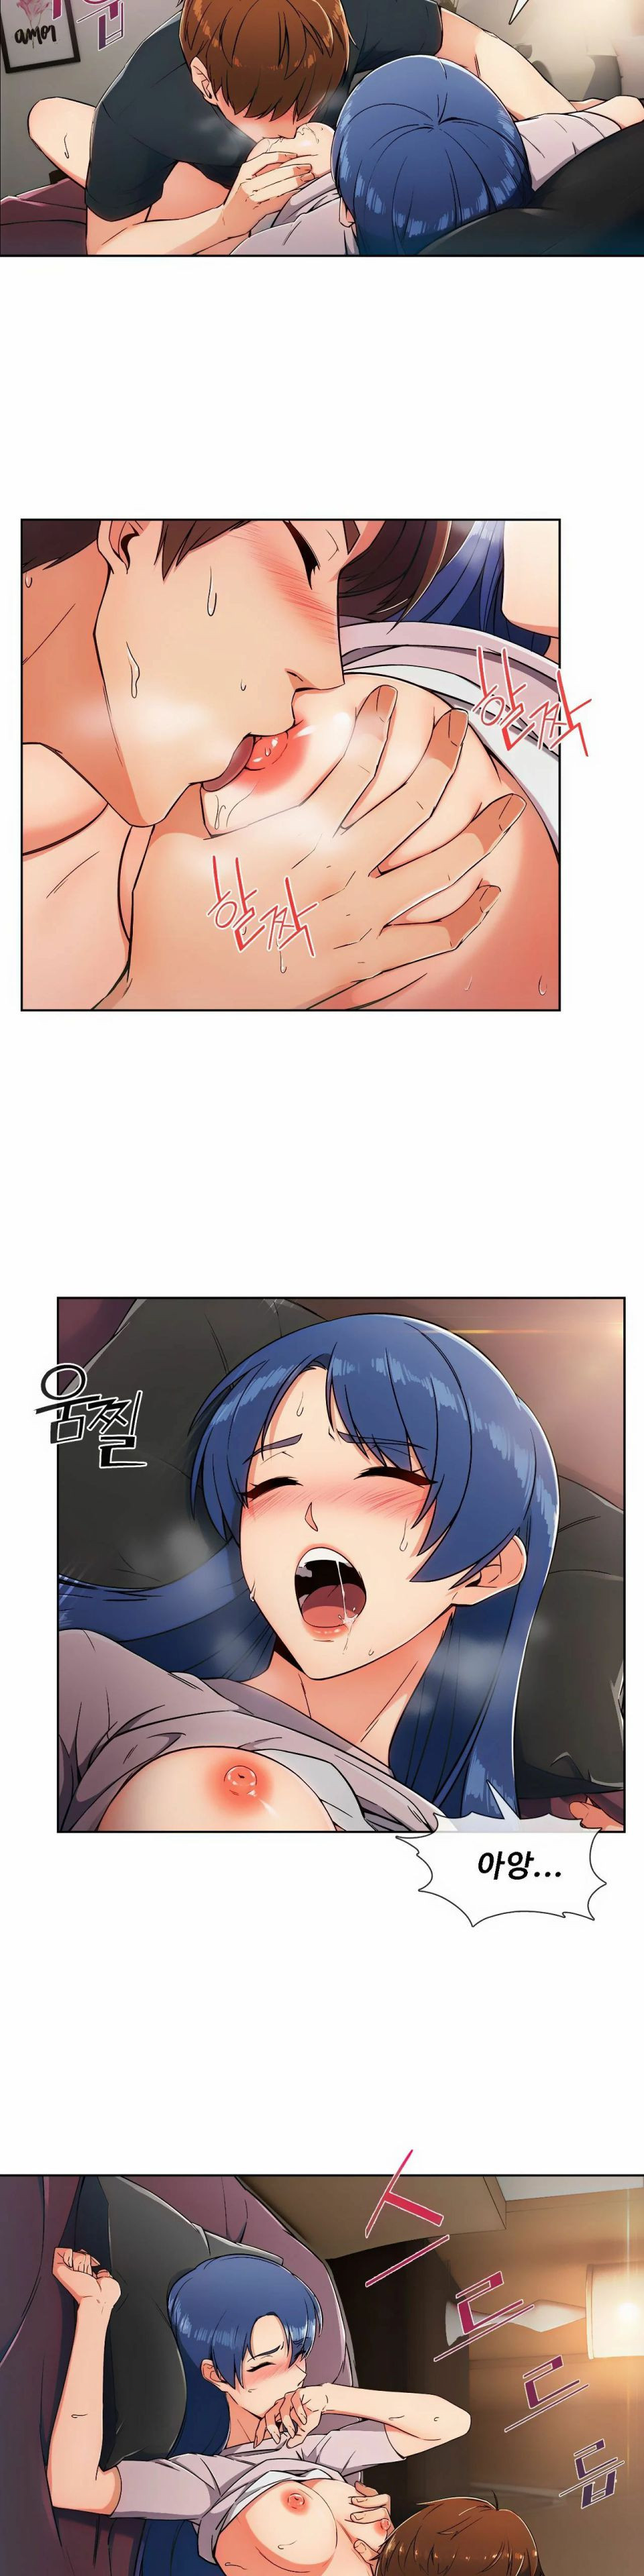 Sincere Minhyuk Raw - Chapter 1 Page 3